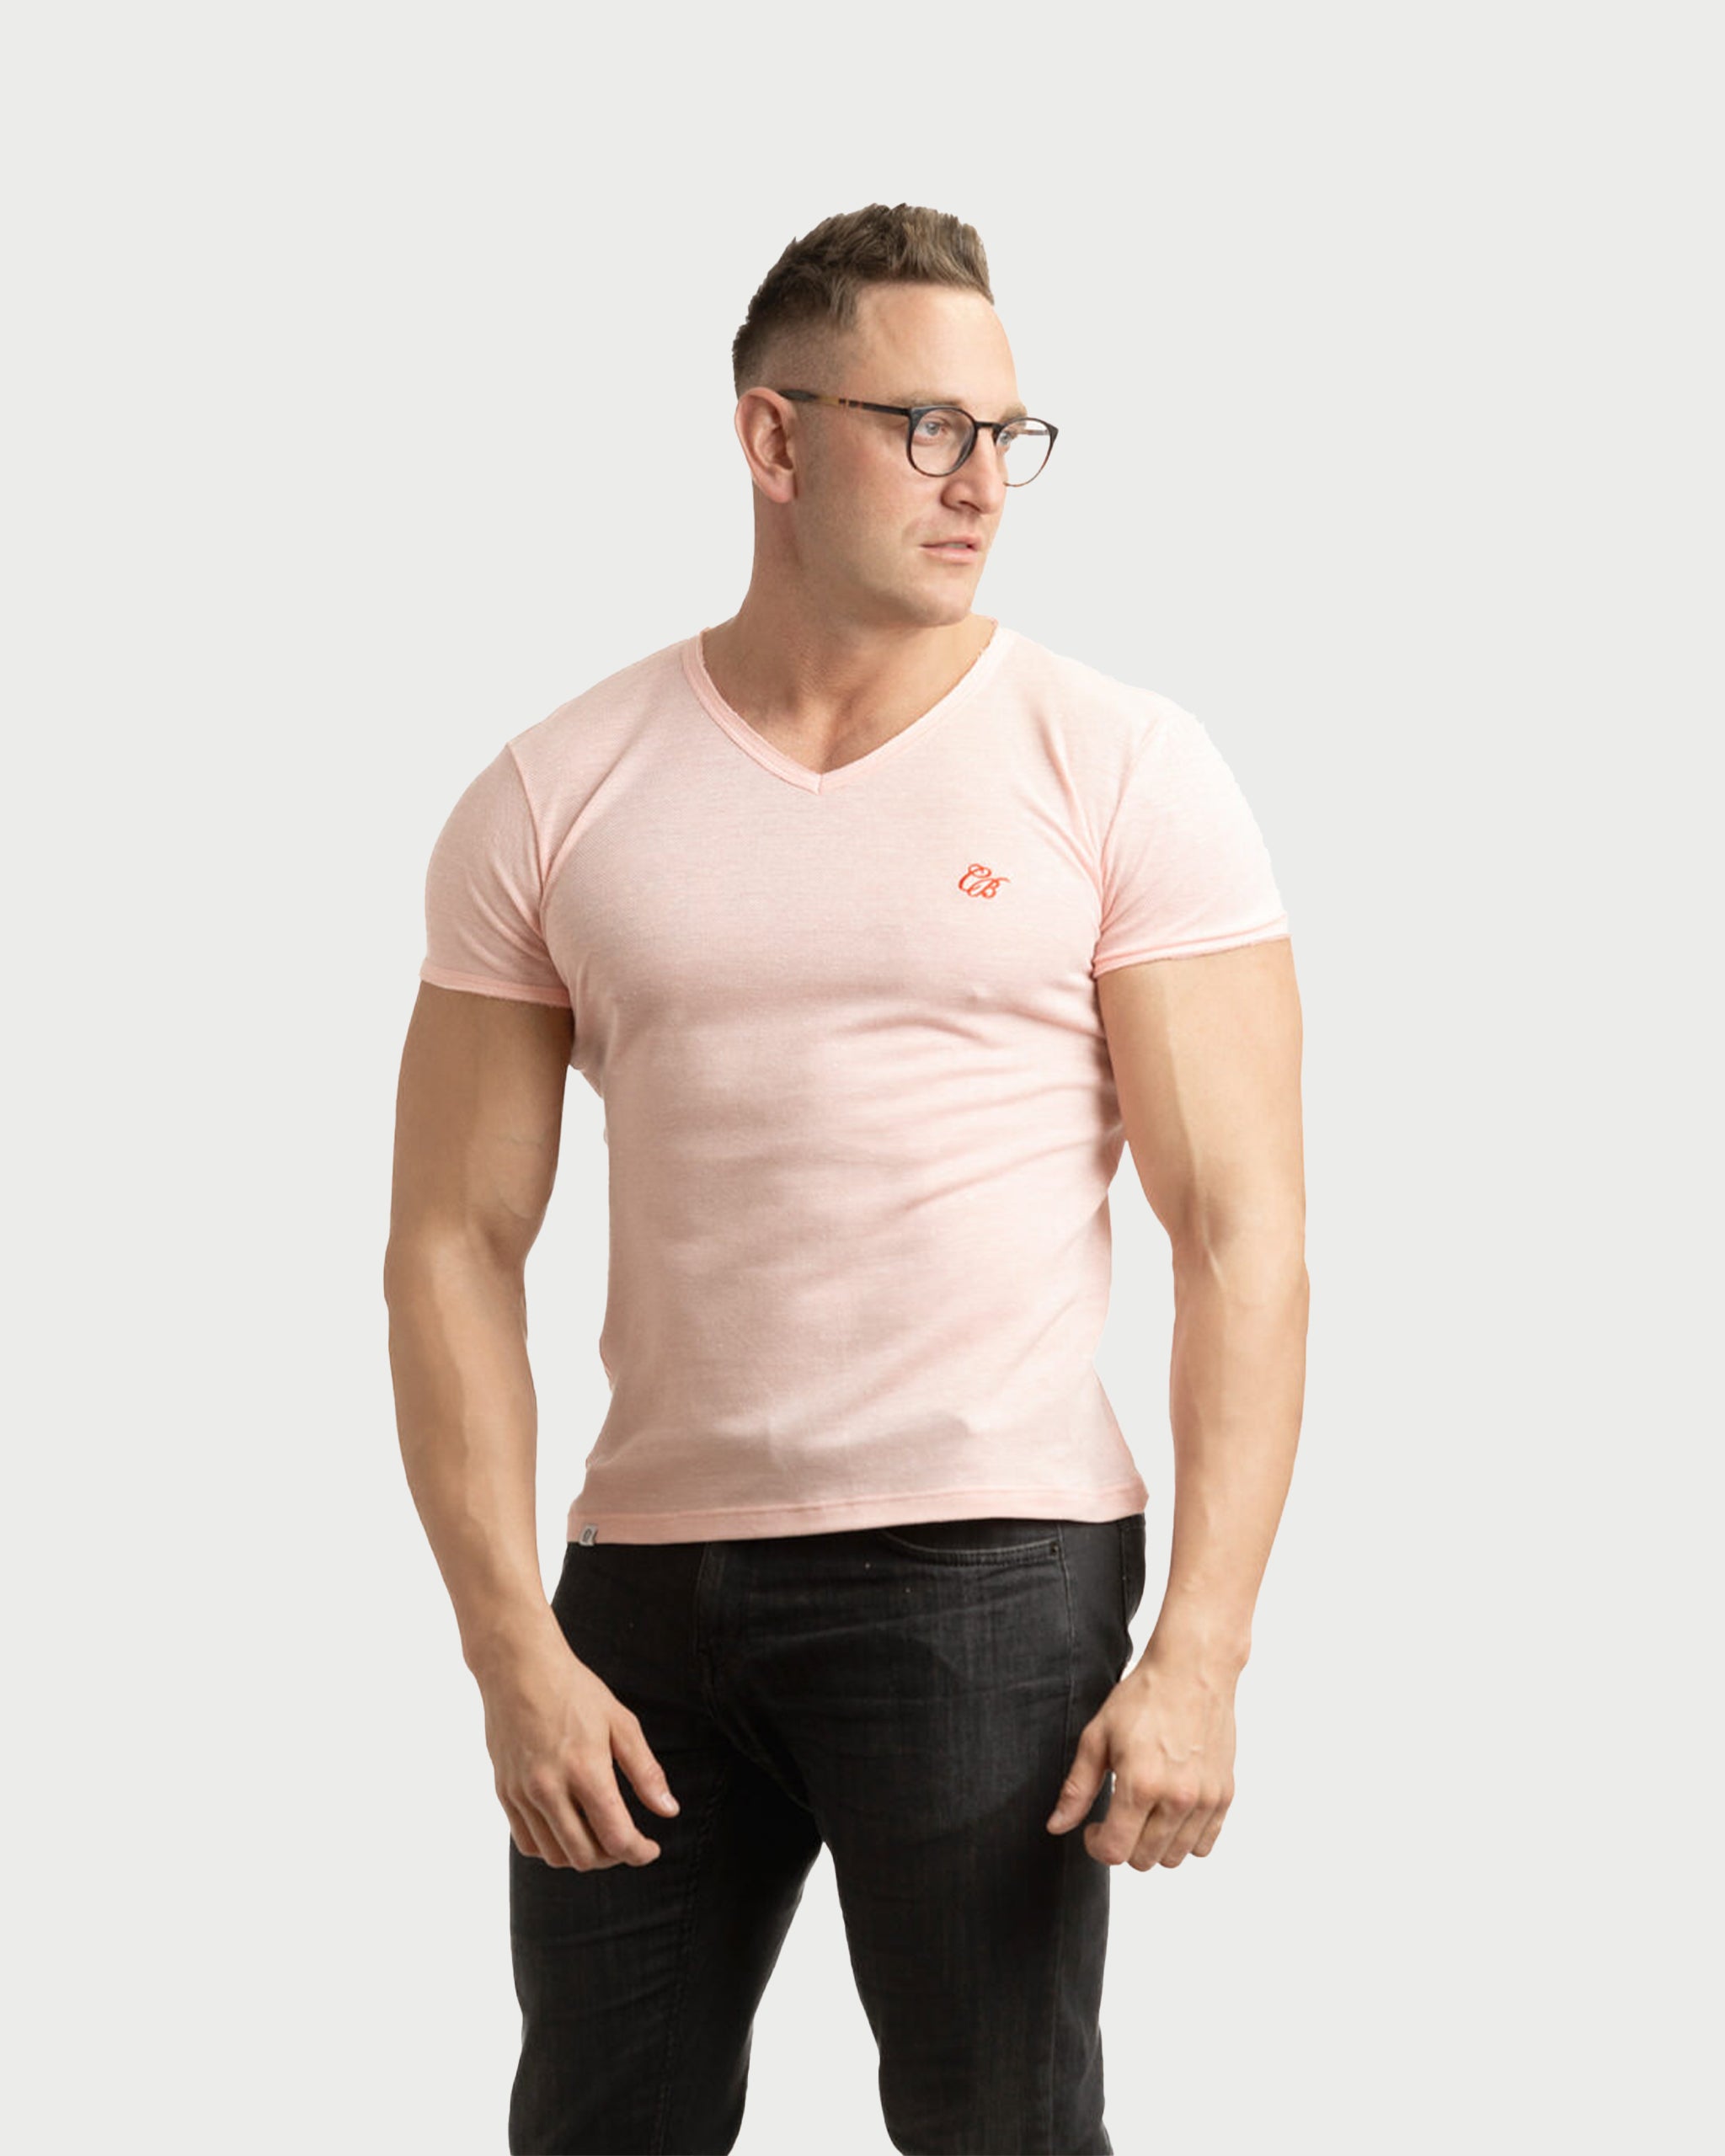 CORAL VANITY - tricou din bumbac pique